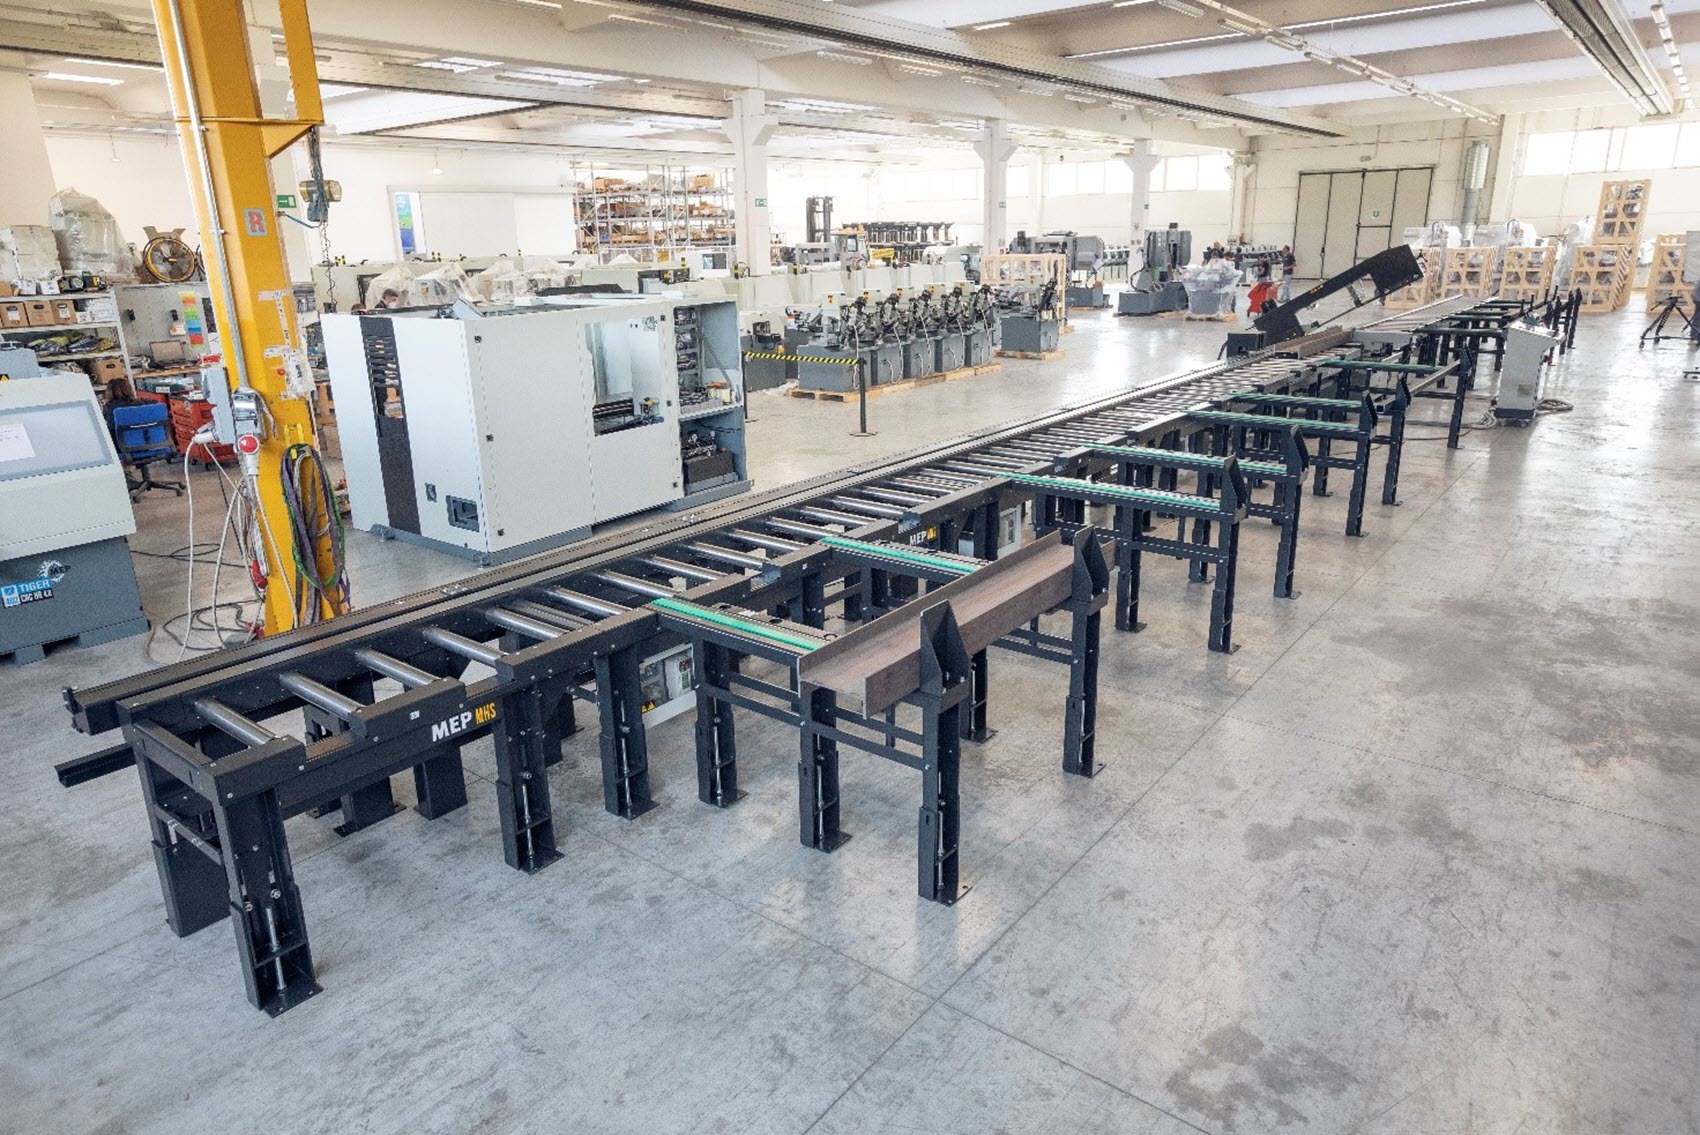 An expansive factory floor with a long conveyor system and various industrial machines.